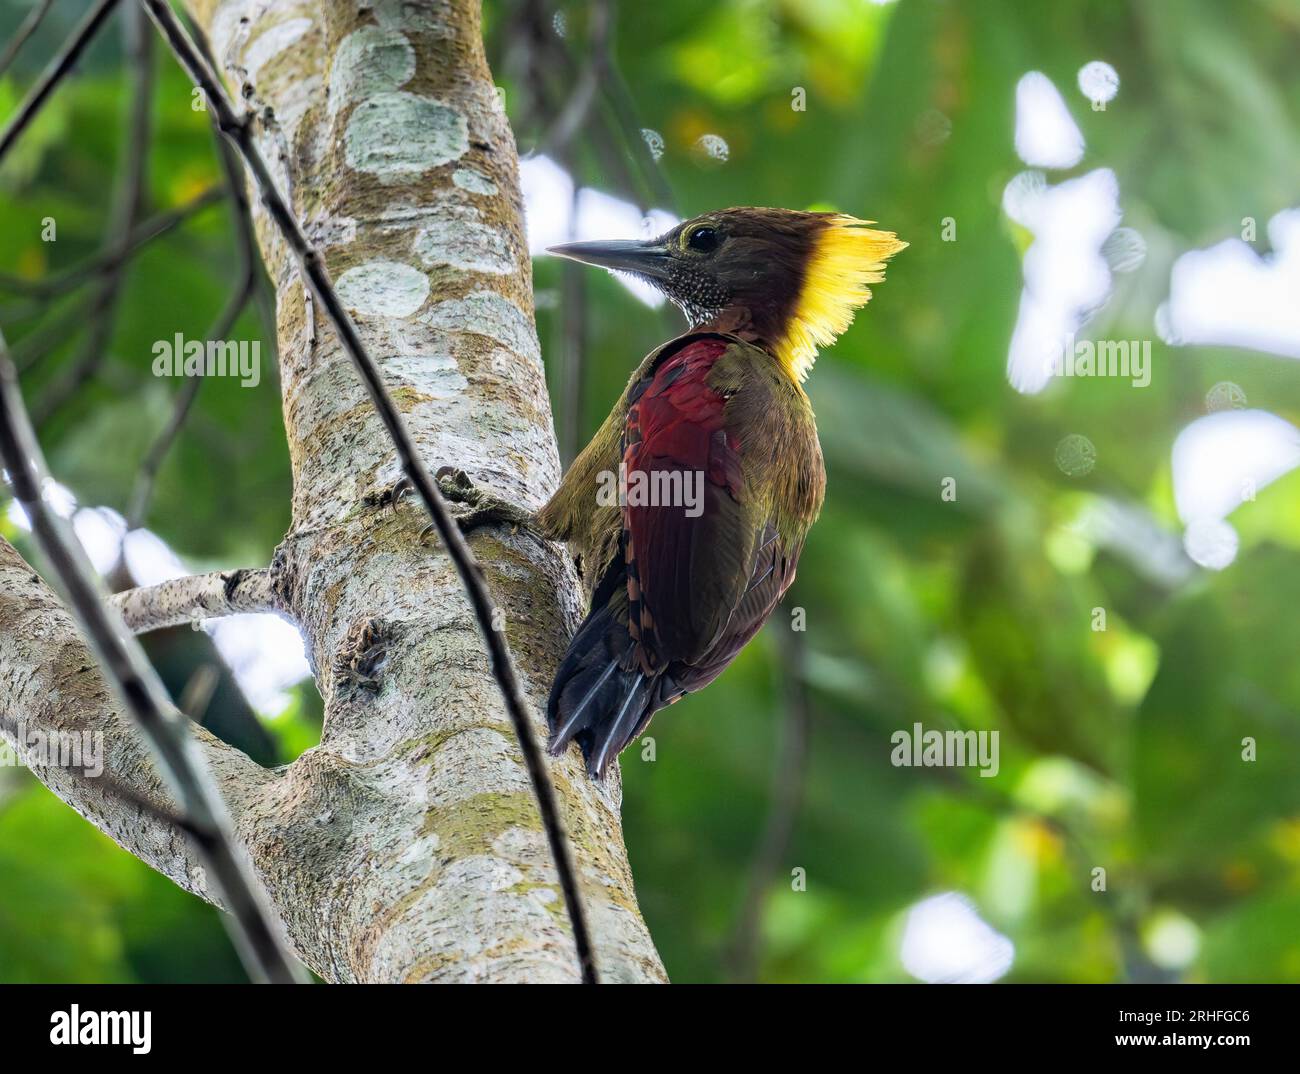 A Checker-throated Woodpecker (Chrysophlegma mentale) foraging on a tree. Sumatra, Indonesia. Stock Photo